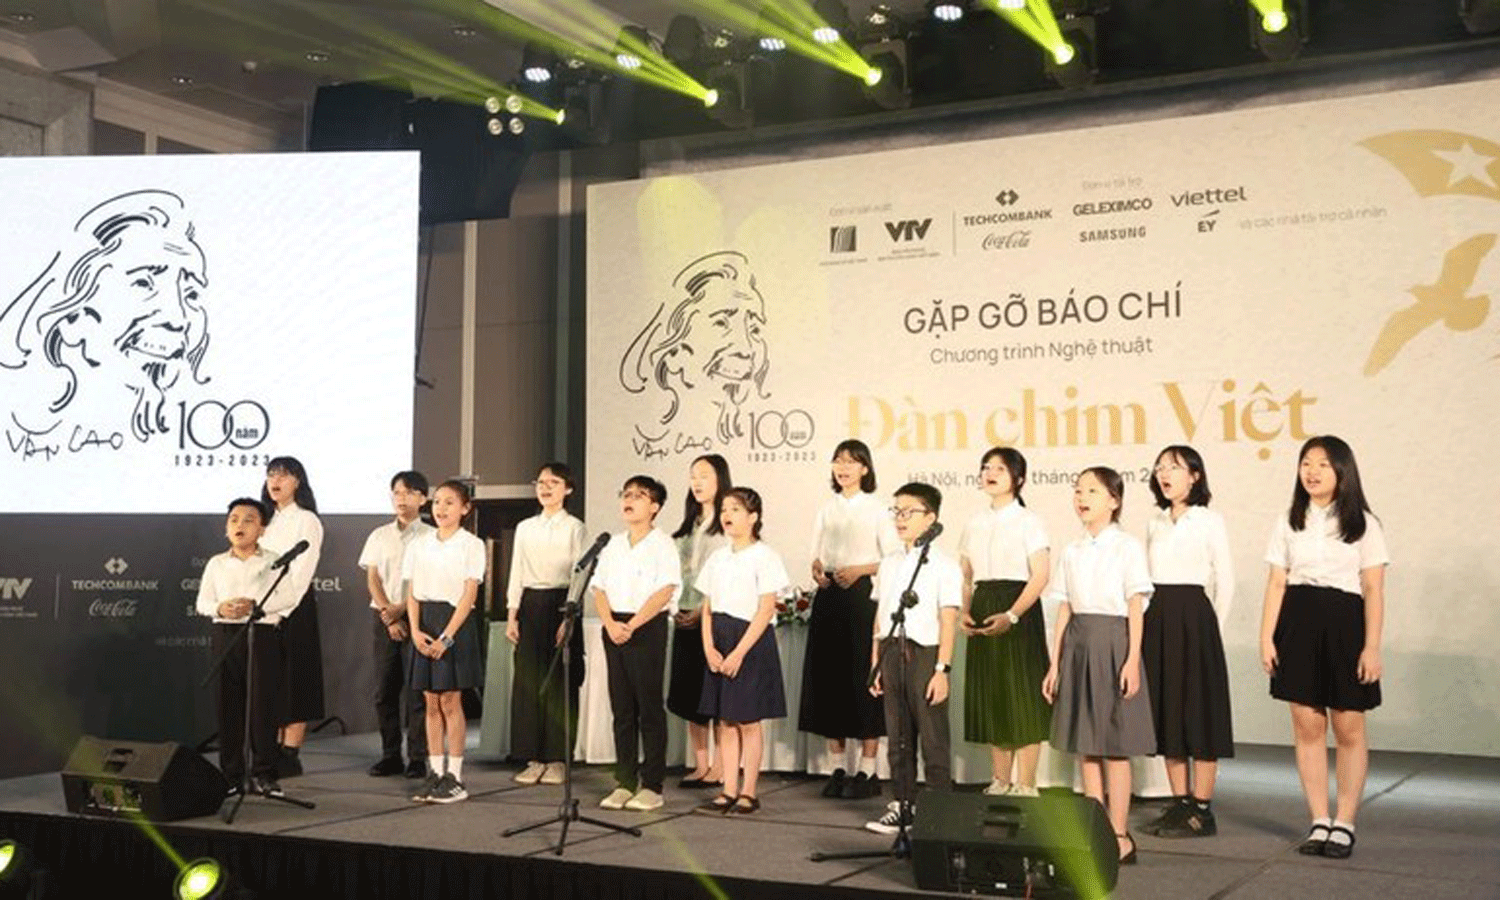 A children’s choir perform a song by Van Cao at the press conference.